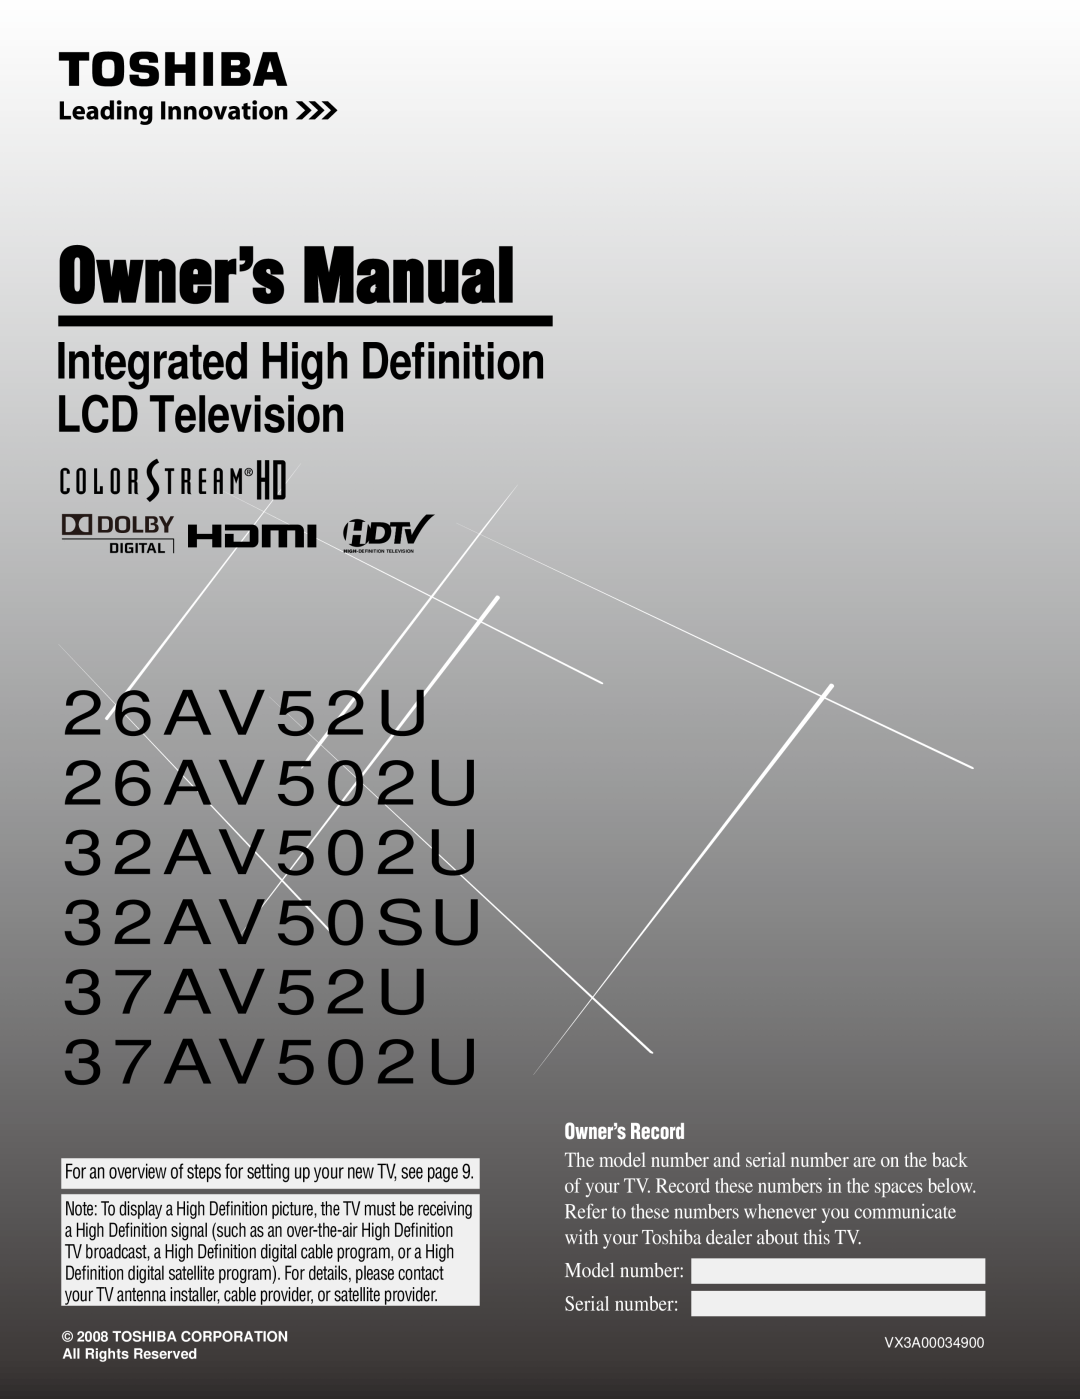 Toshiba 32AV50SU owner manual For an overview of steps for setting up your new TV, see page, Owner’s Manual, VX3A00034900 